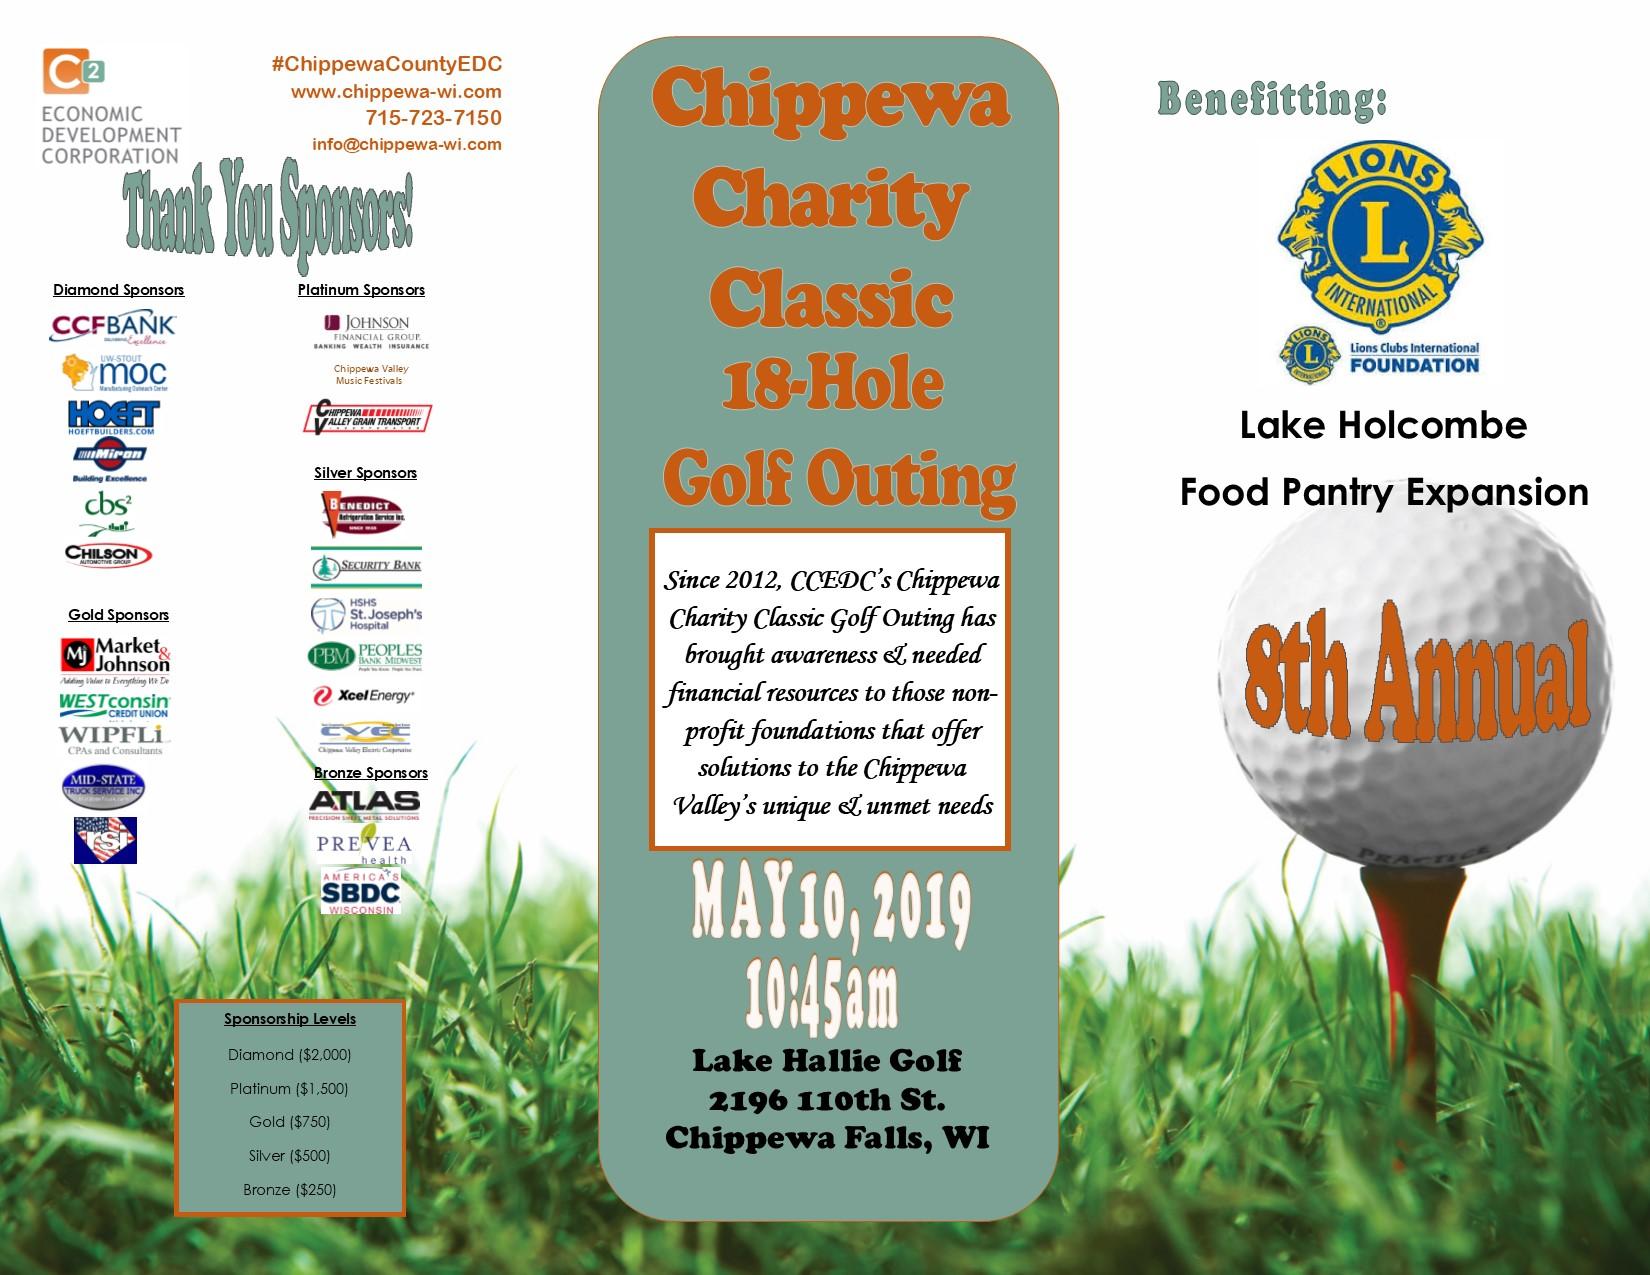 Chippewa Charity Classic Golf Outing